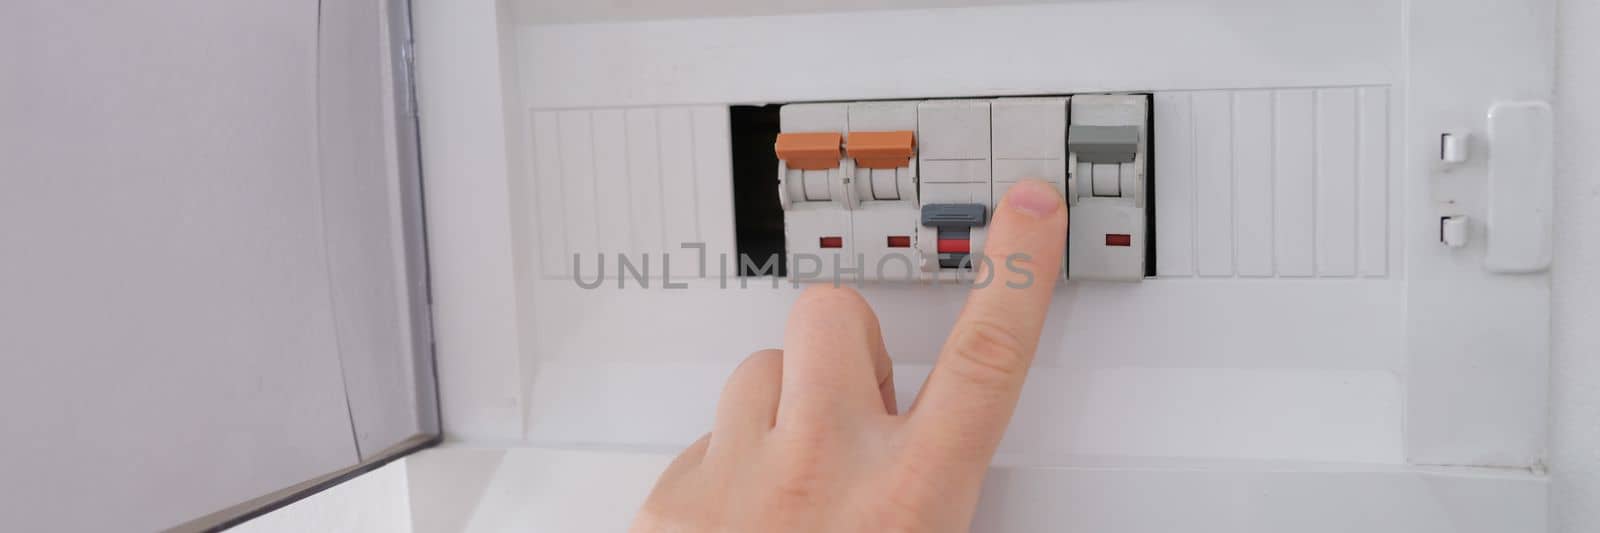 Many switches displayed on circuit breaker board. Fnger is about to turn it back on white